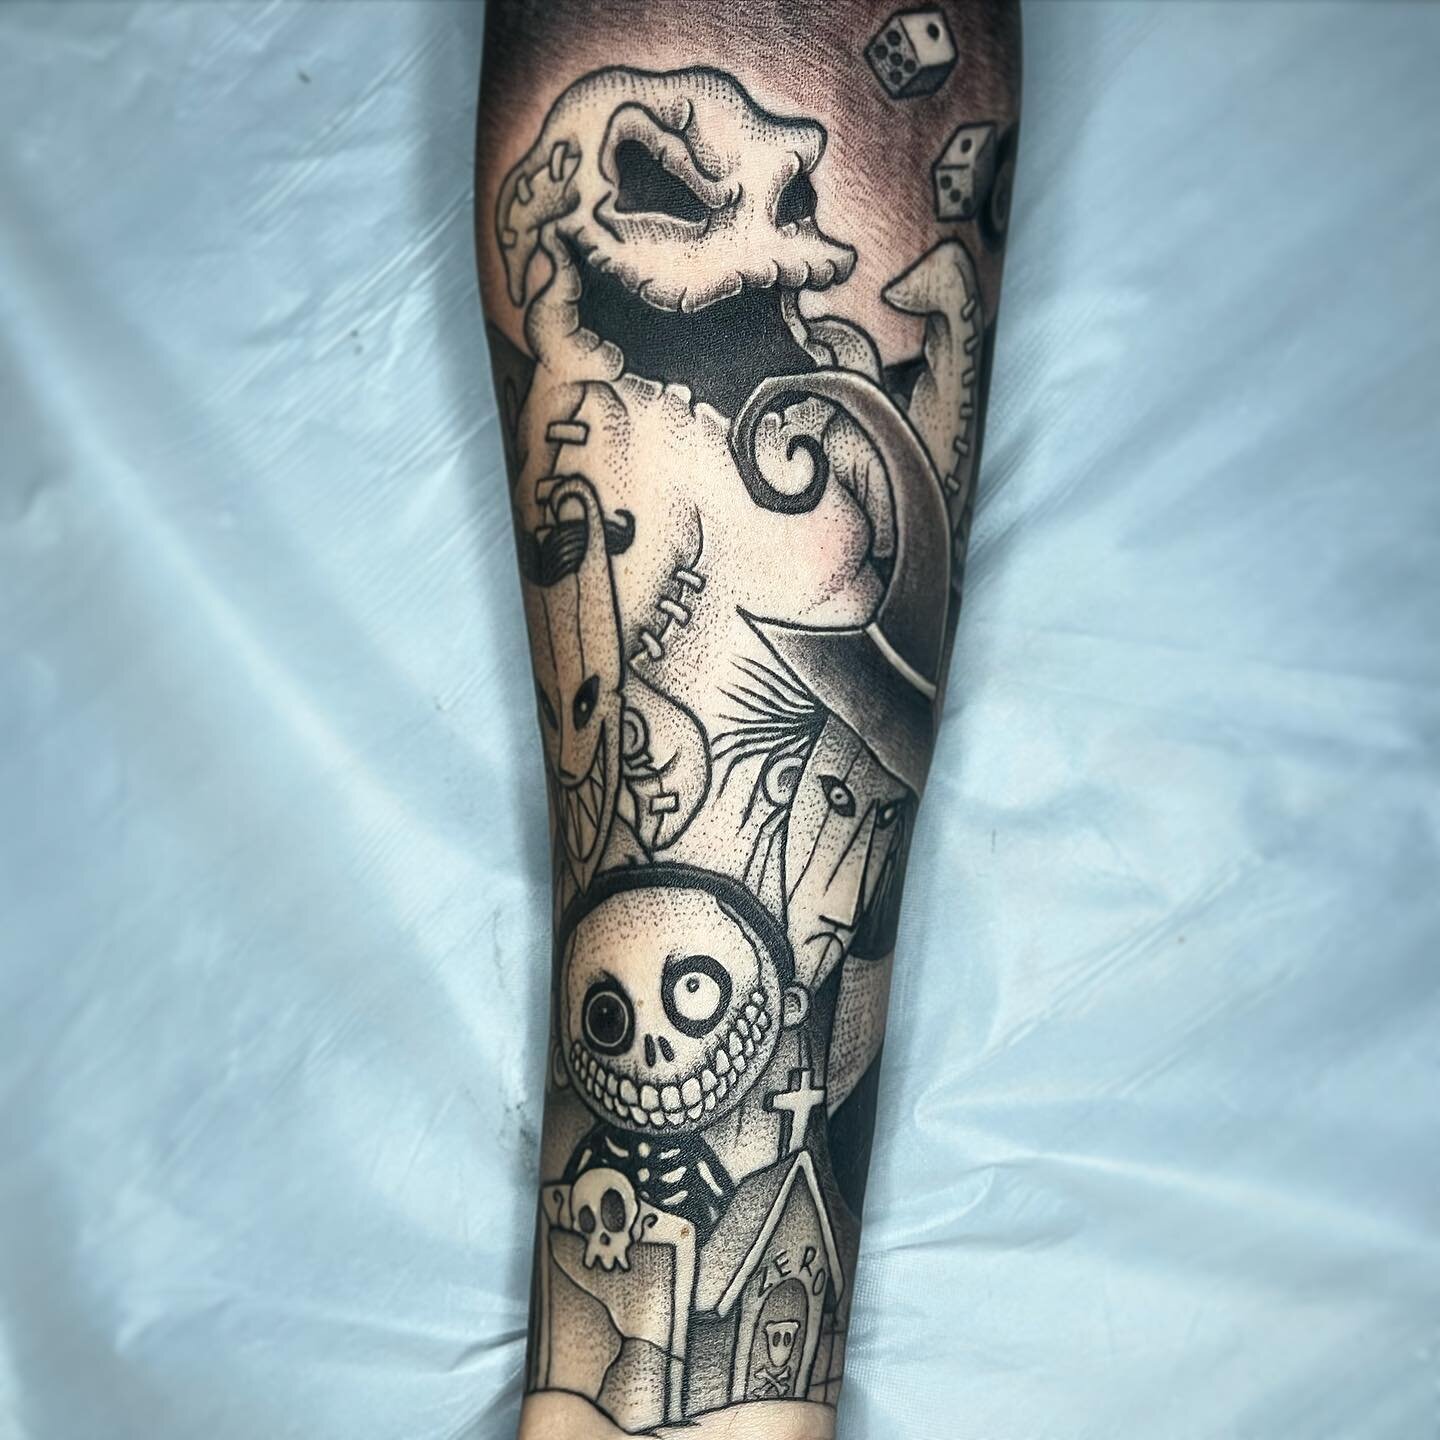 Finished up this Tim Burton sleeve on @hannabrianne 
Thank you Hanna, super fun project! 

#tattoosleeve #timburtontattoo #timburtonsleeve #tattoo #chicoca